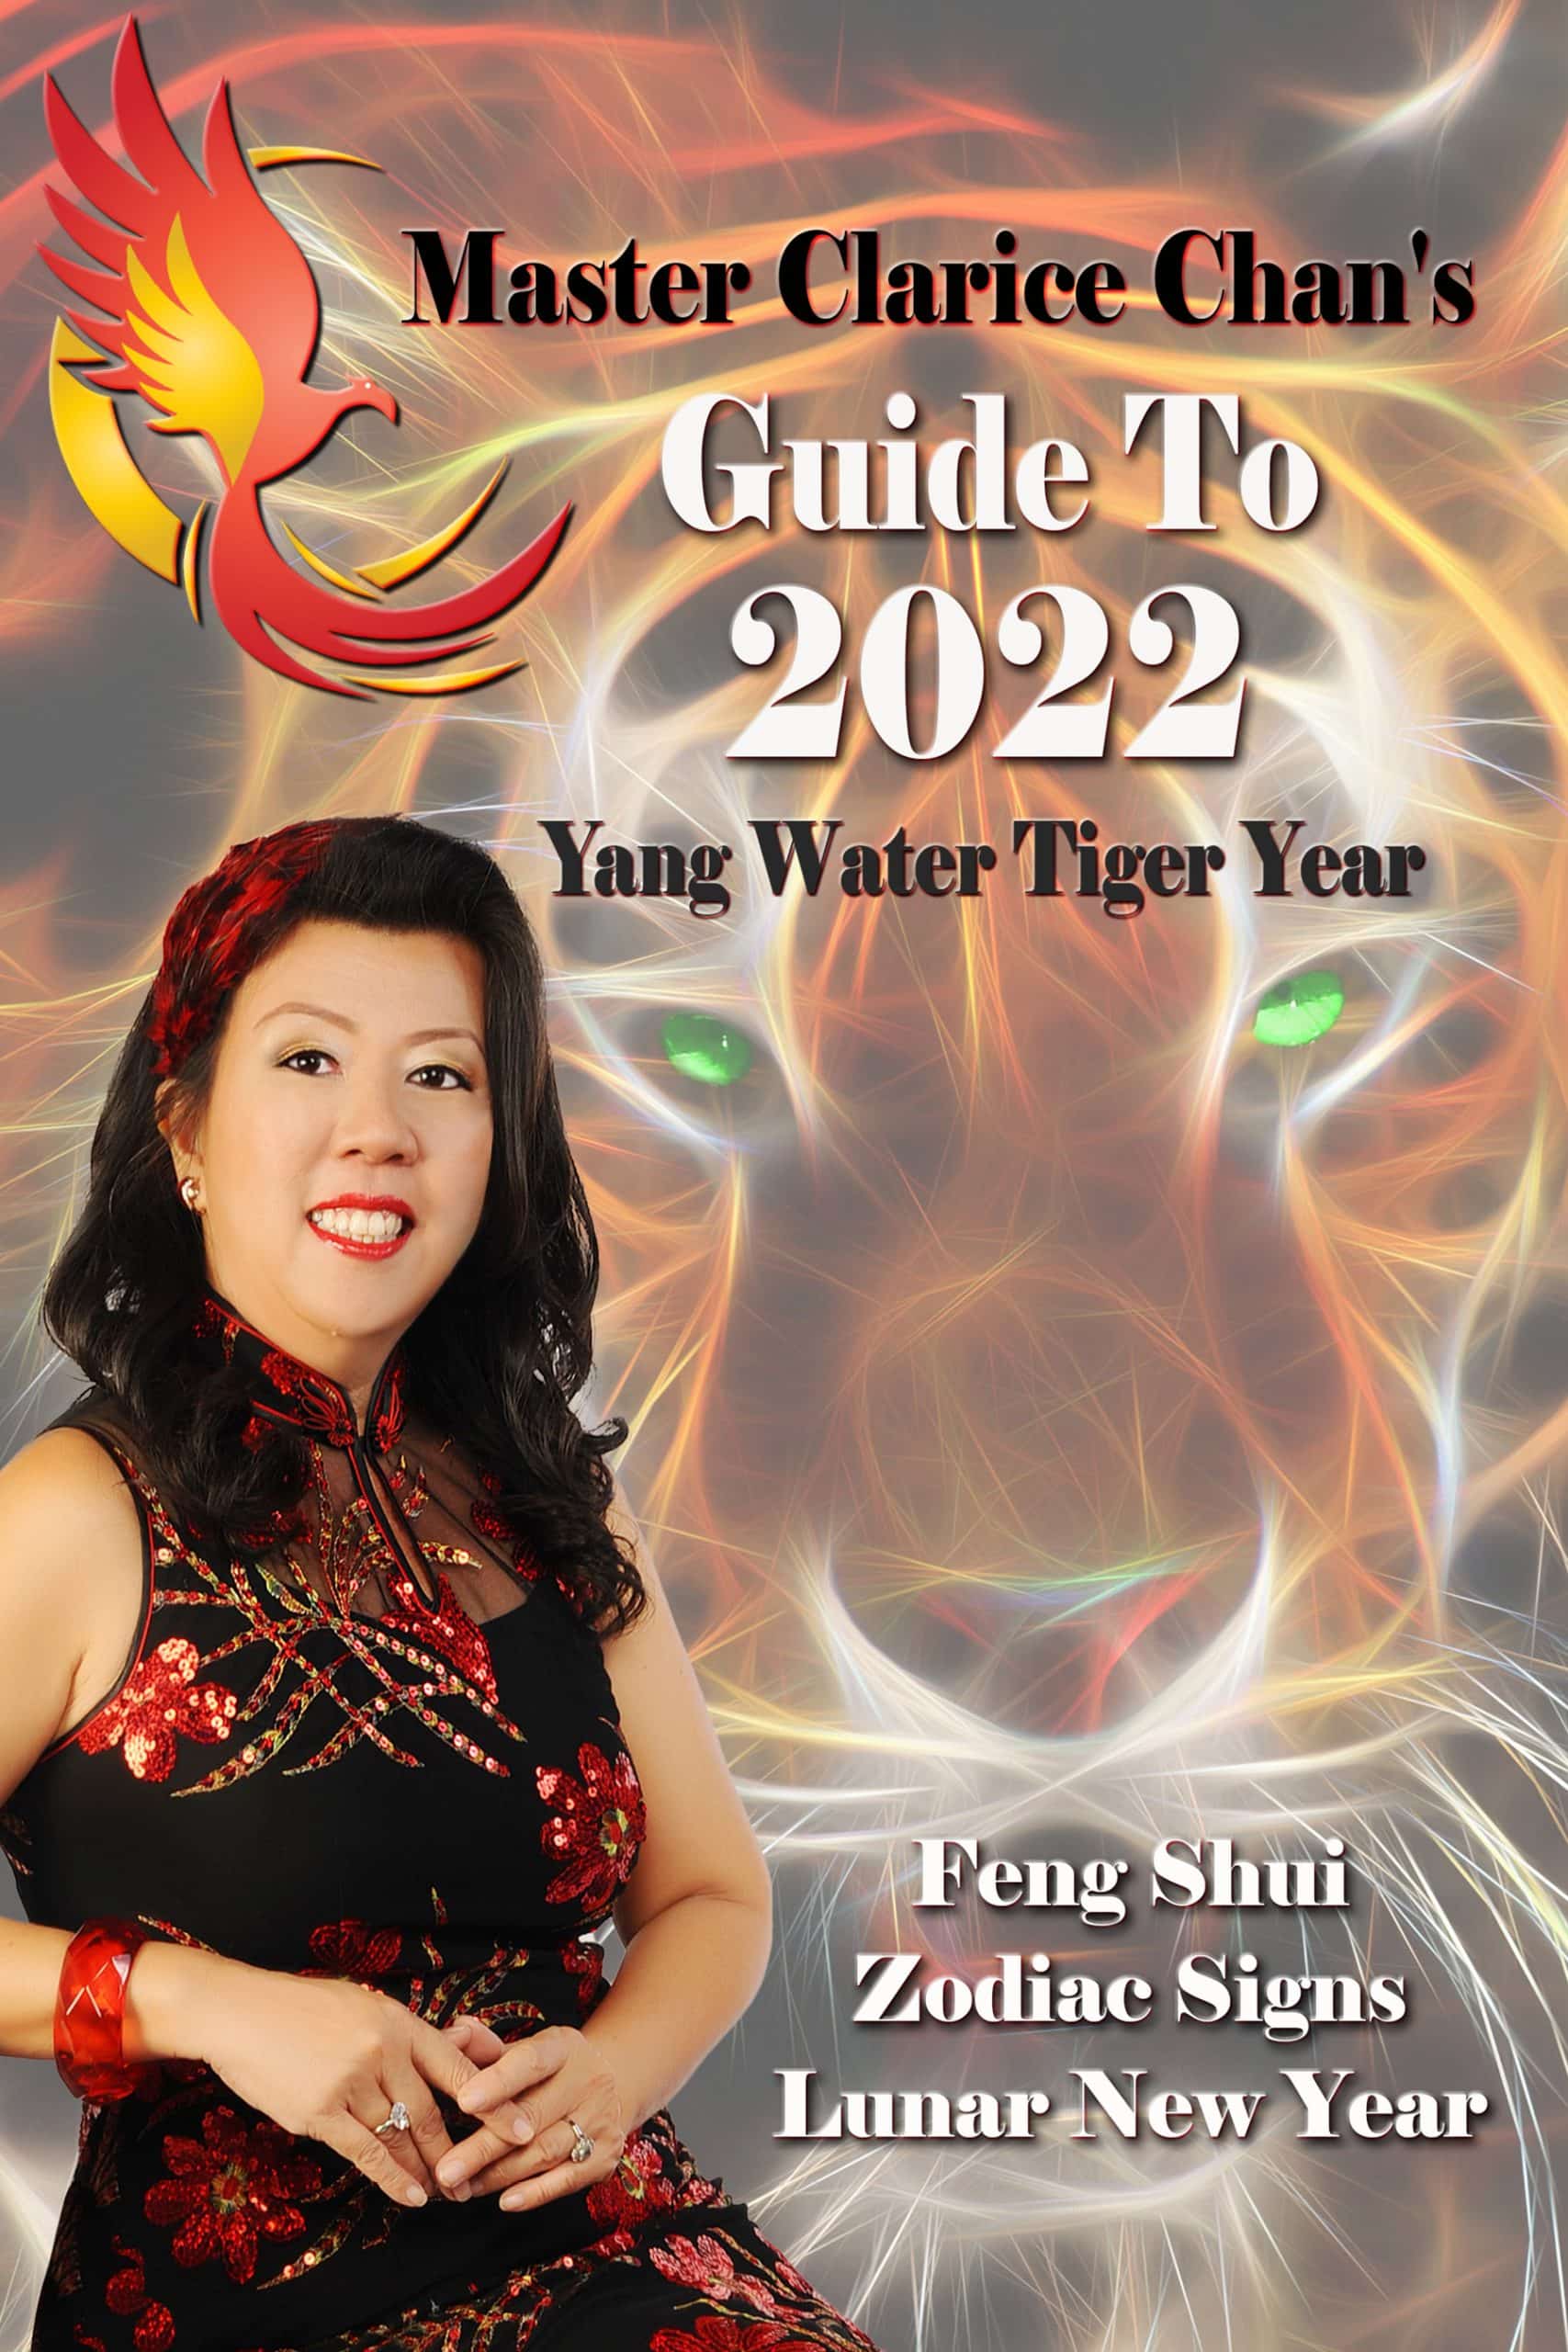 Master Clarice Chan’s Guide to 2022-Yang Water Tiger Year